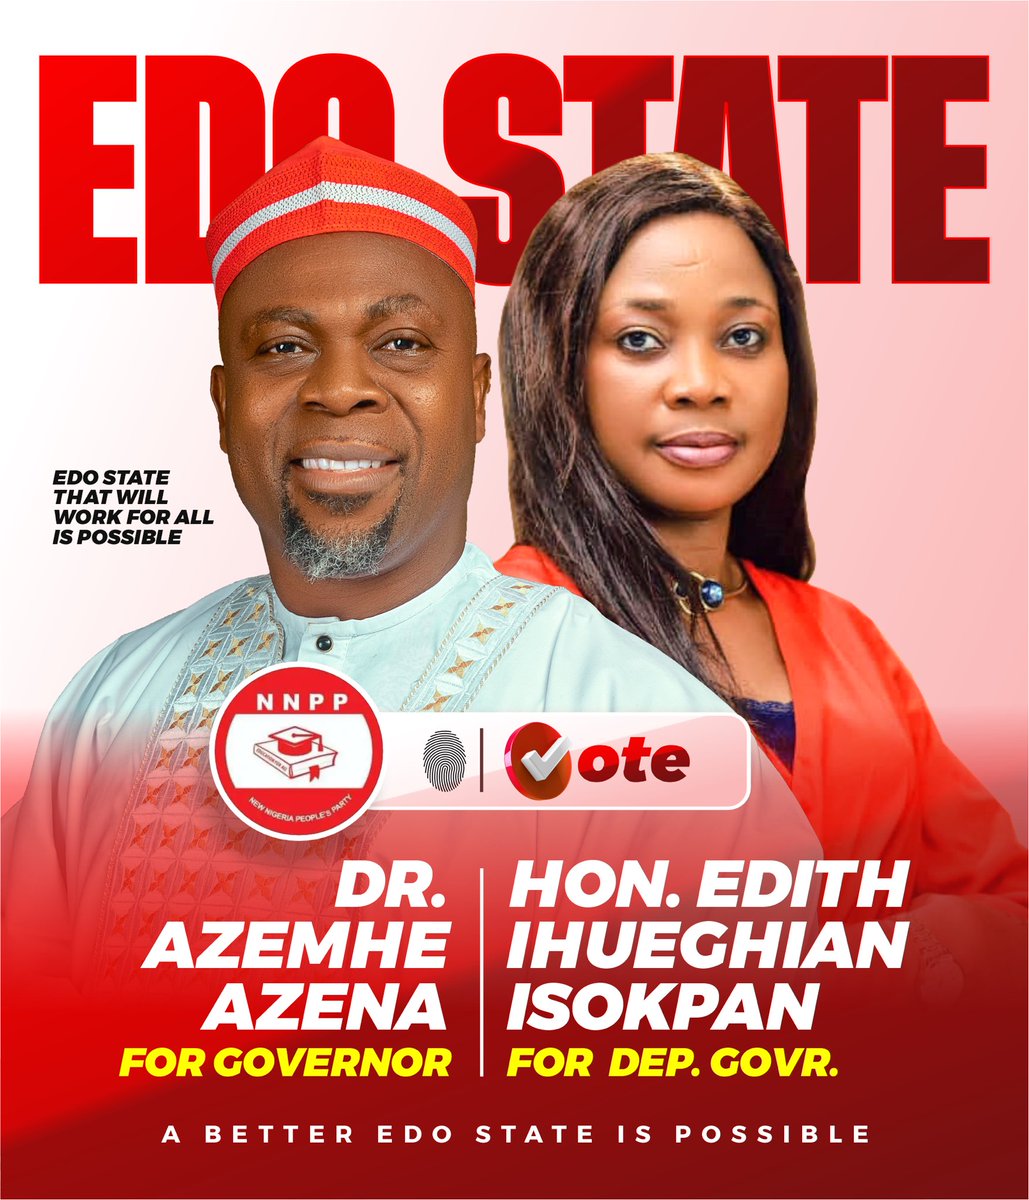 As the gubernatorial candidate for the New Nigeria People’s Party (NNPP) in the upcoming election in Edo state, I am fully committed to making our state better and bigger than ever before. Myself and my esteemed deputy Hon. Edith, our renewed commitment stems from a deep-seated